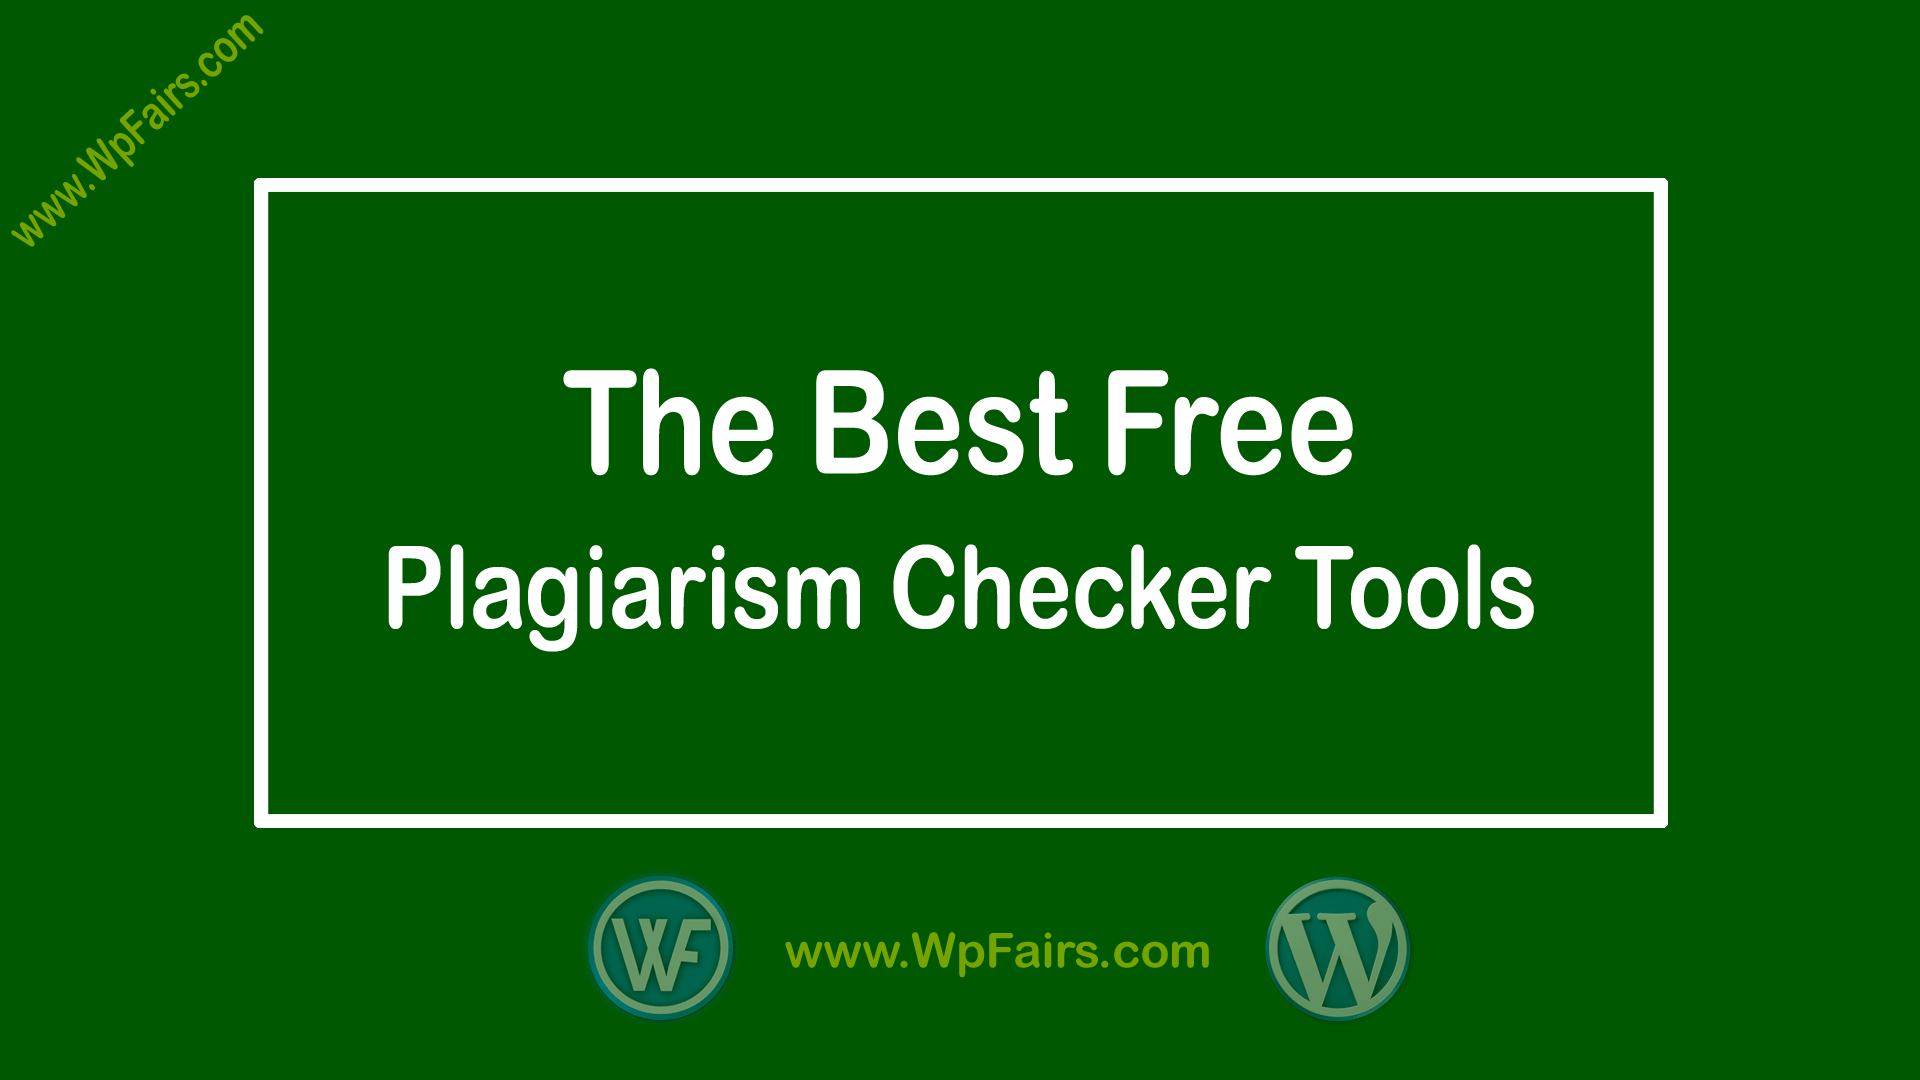 15 Best Free Plagiarism Checker Tools